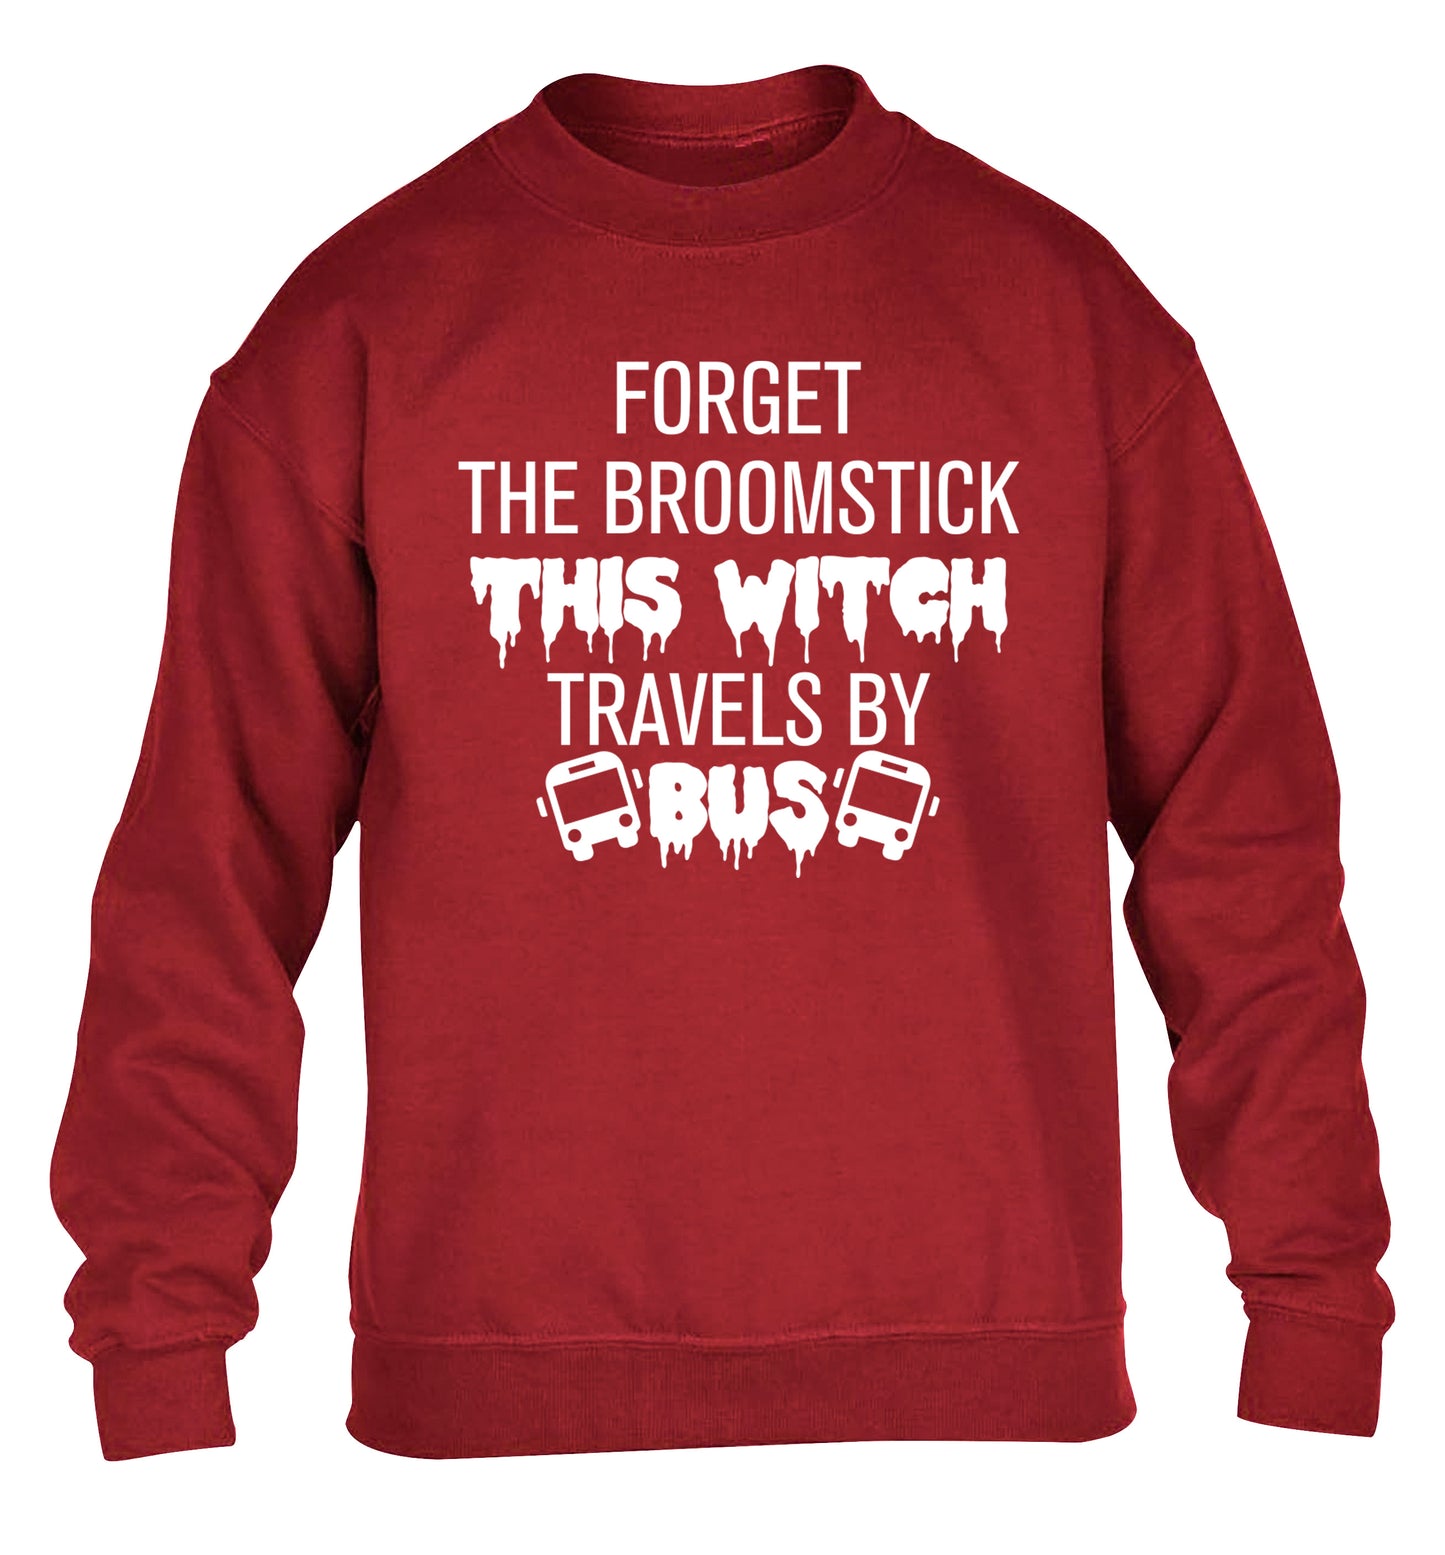 Forget the broomstick this witch travels by bus children's grey sweater 12-14 Years